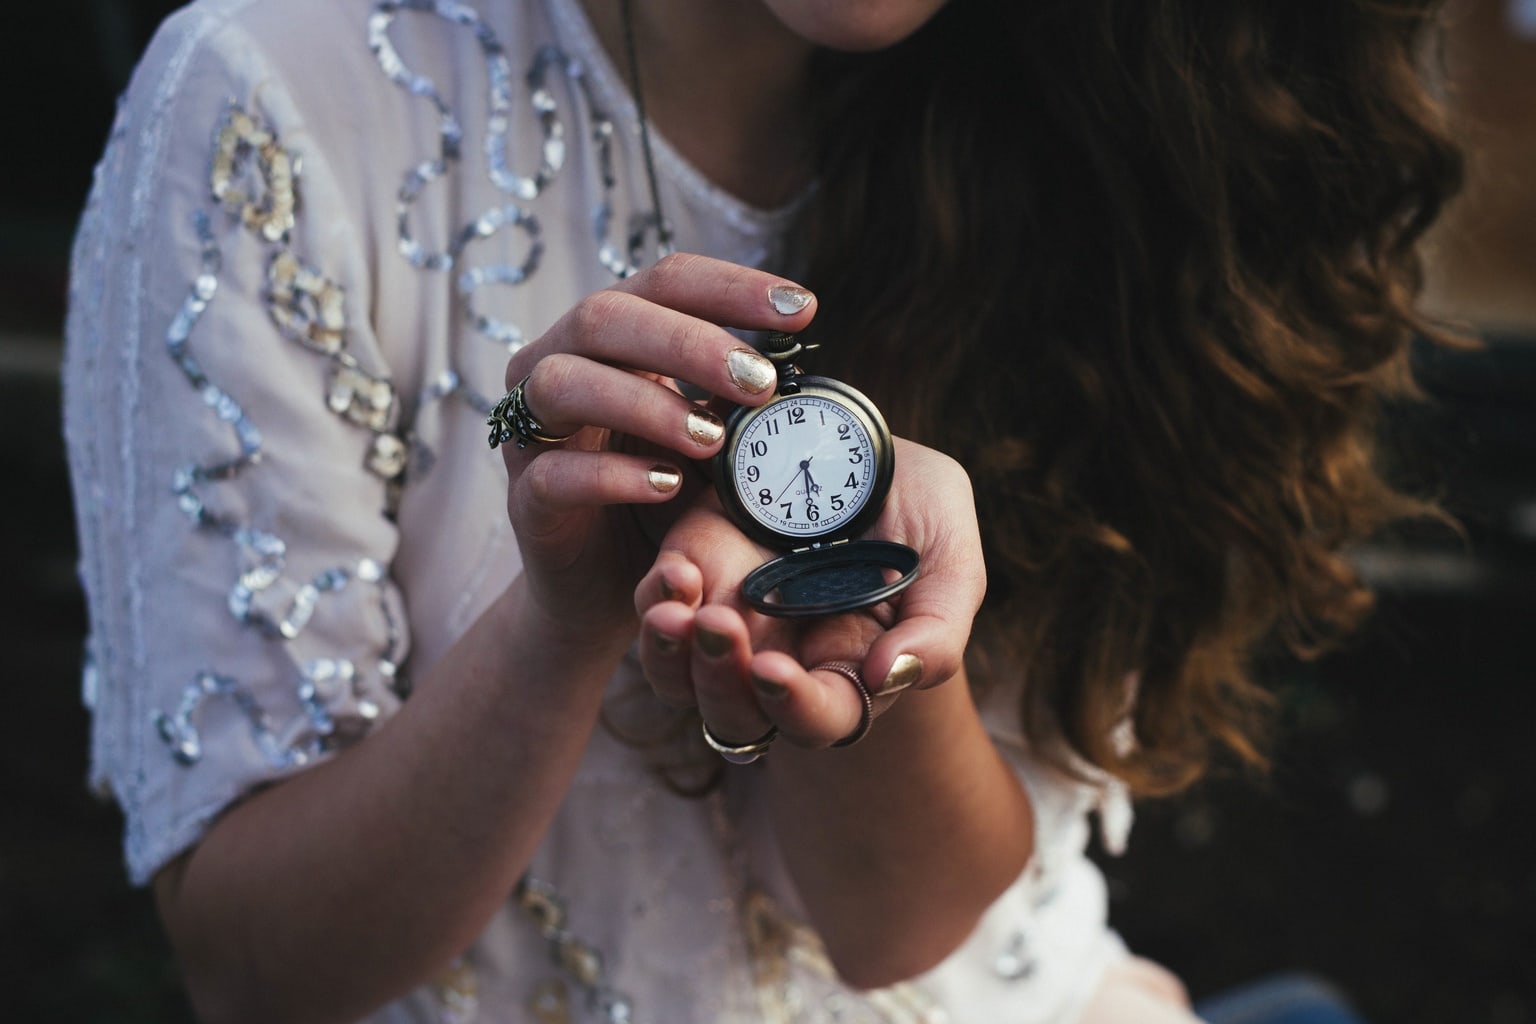 Woman holding a pocket watch with the time 5:30 displayed